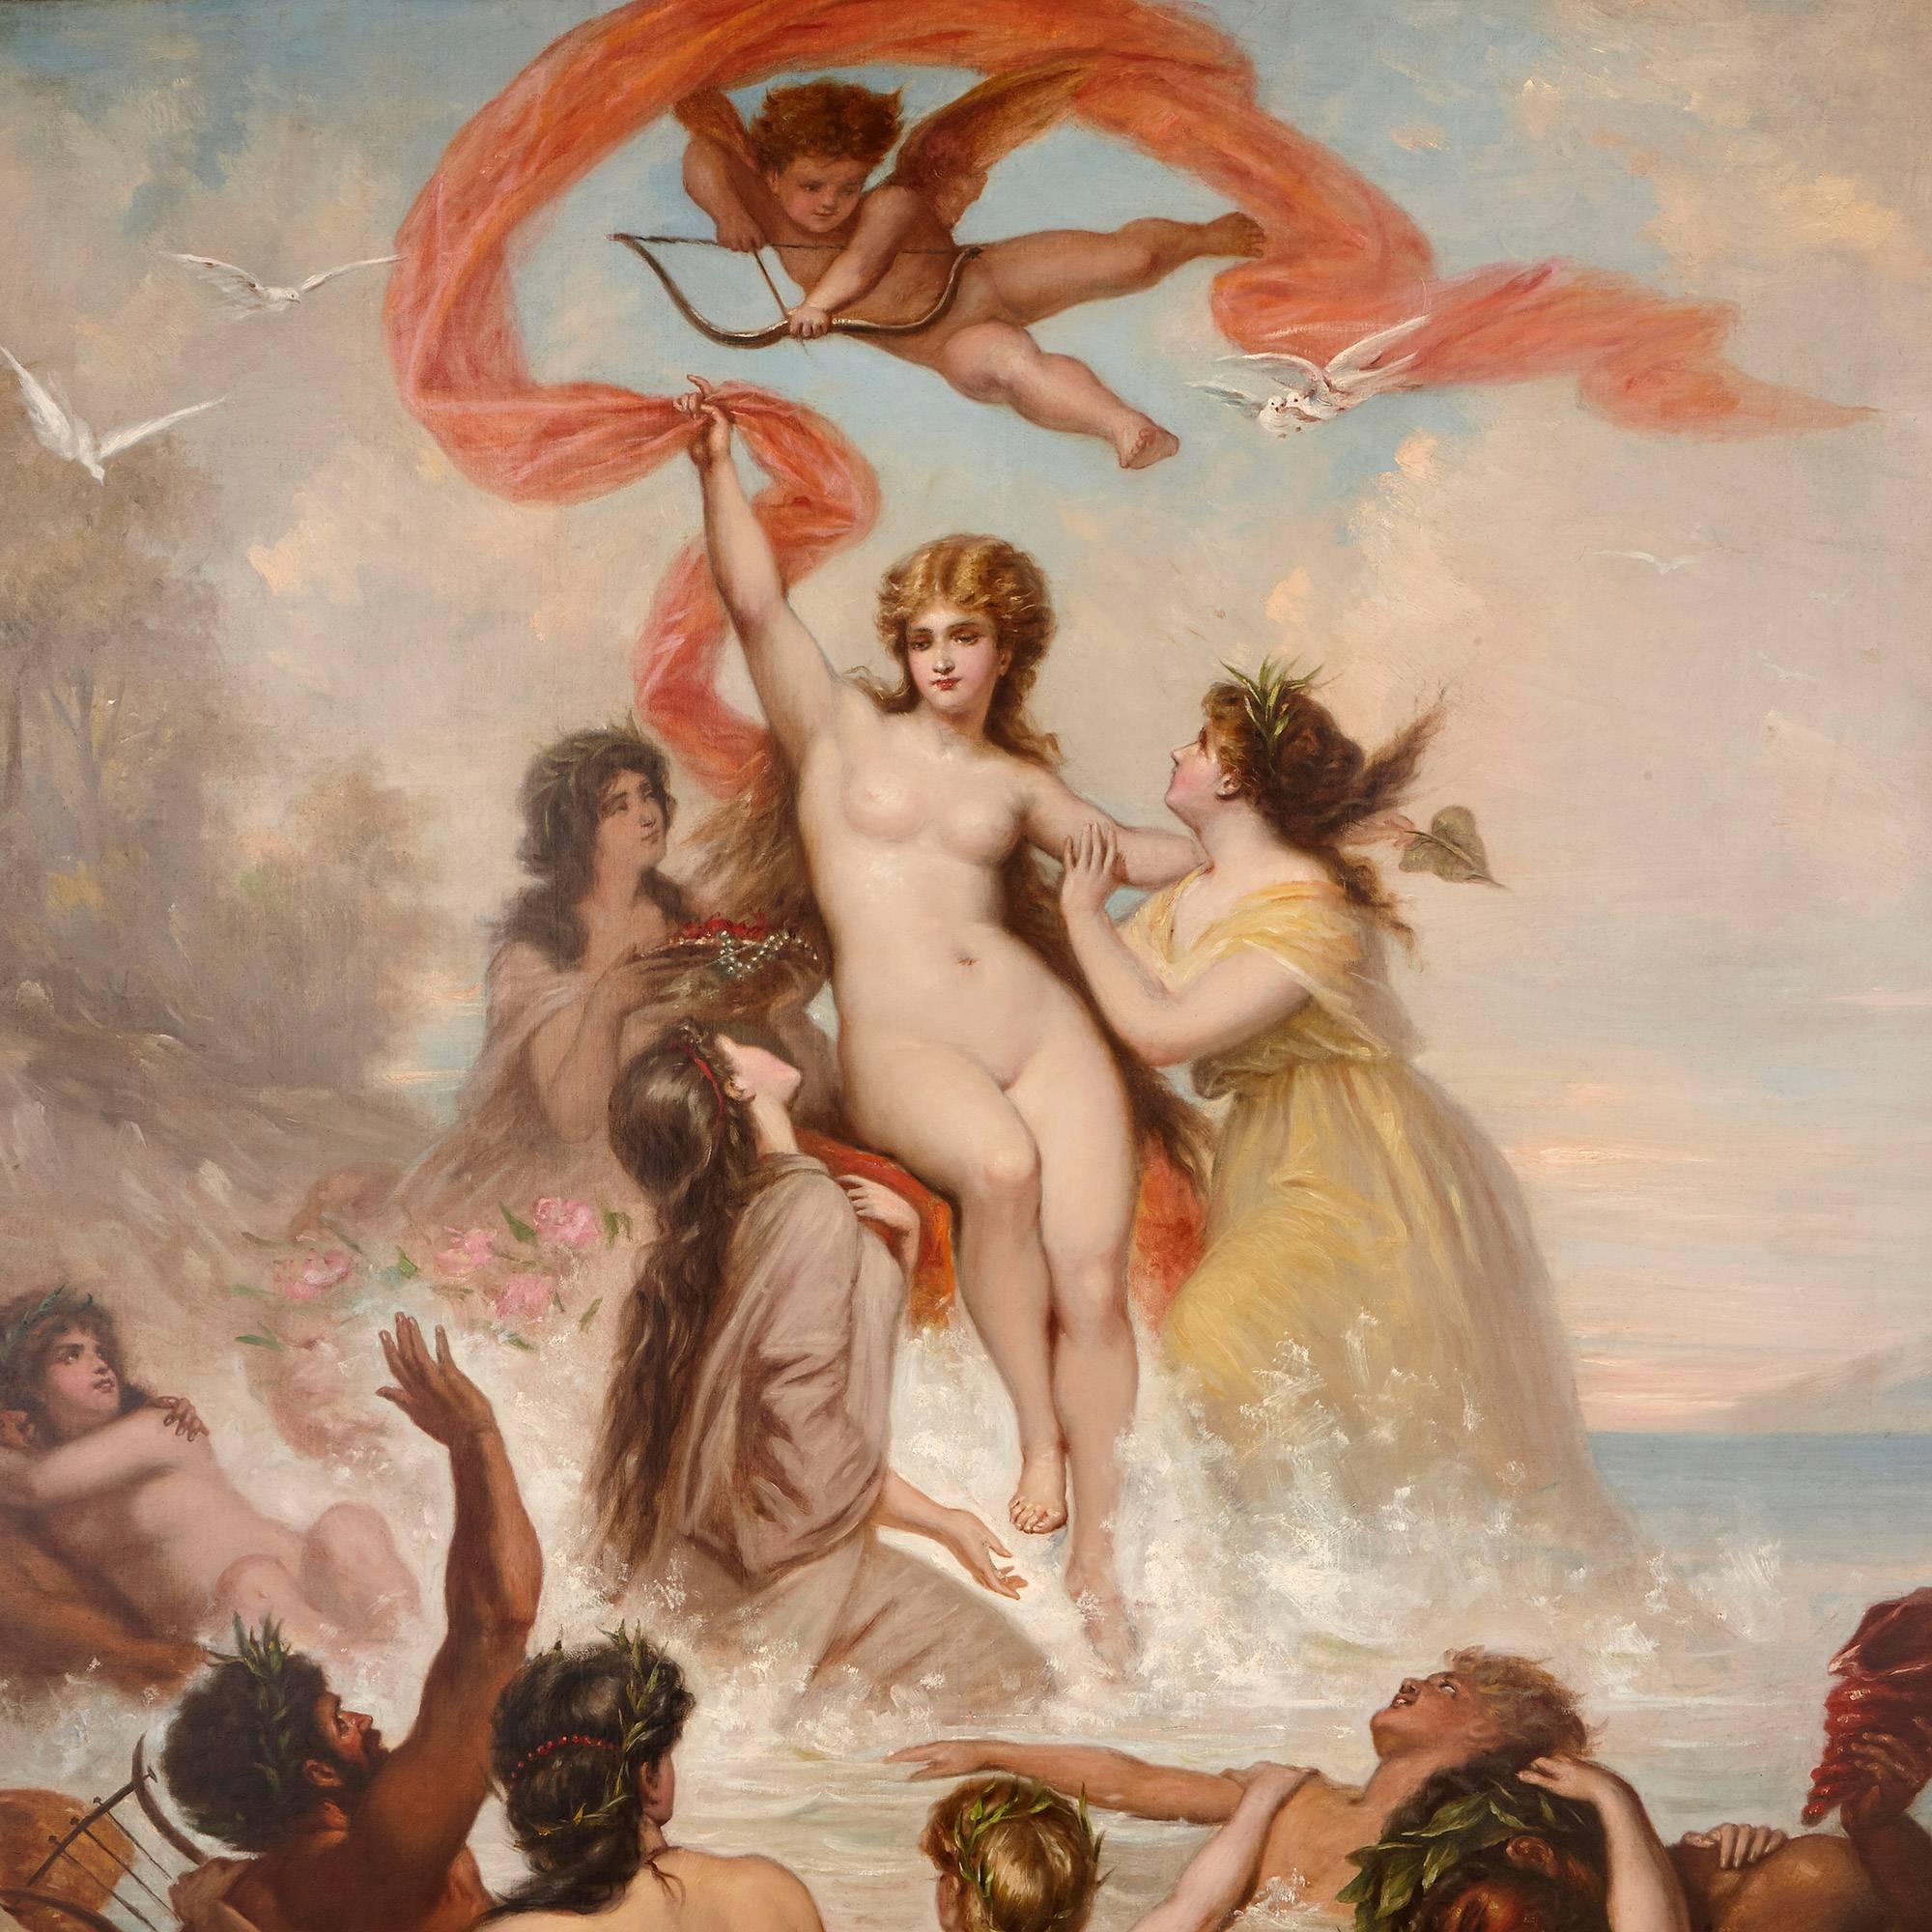 Oil painting of The Triumph of Venus 1